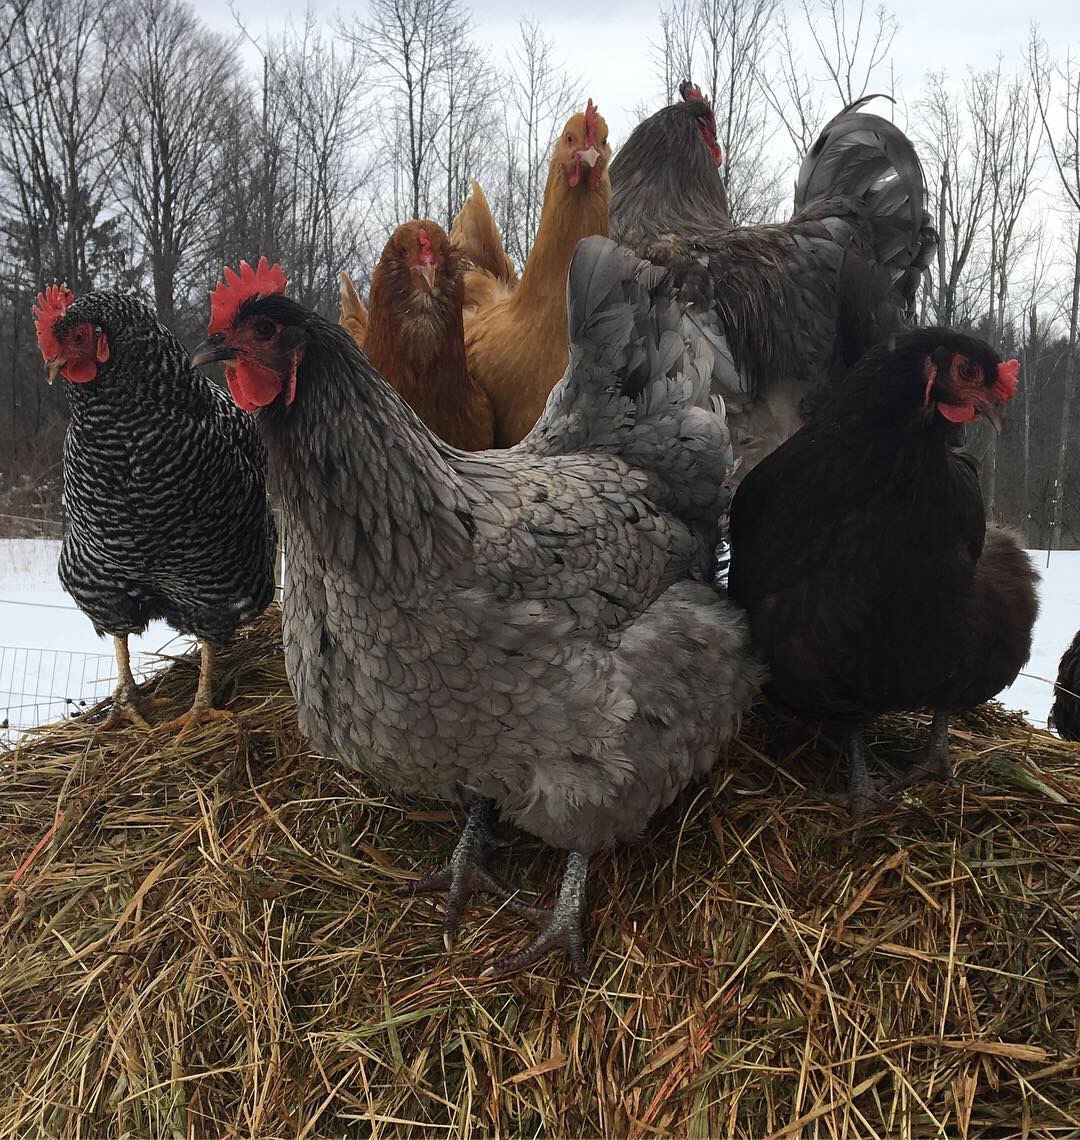 Winter and Your Backyard Chickens